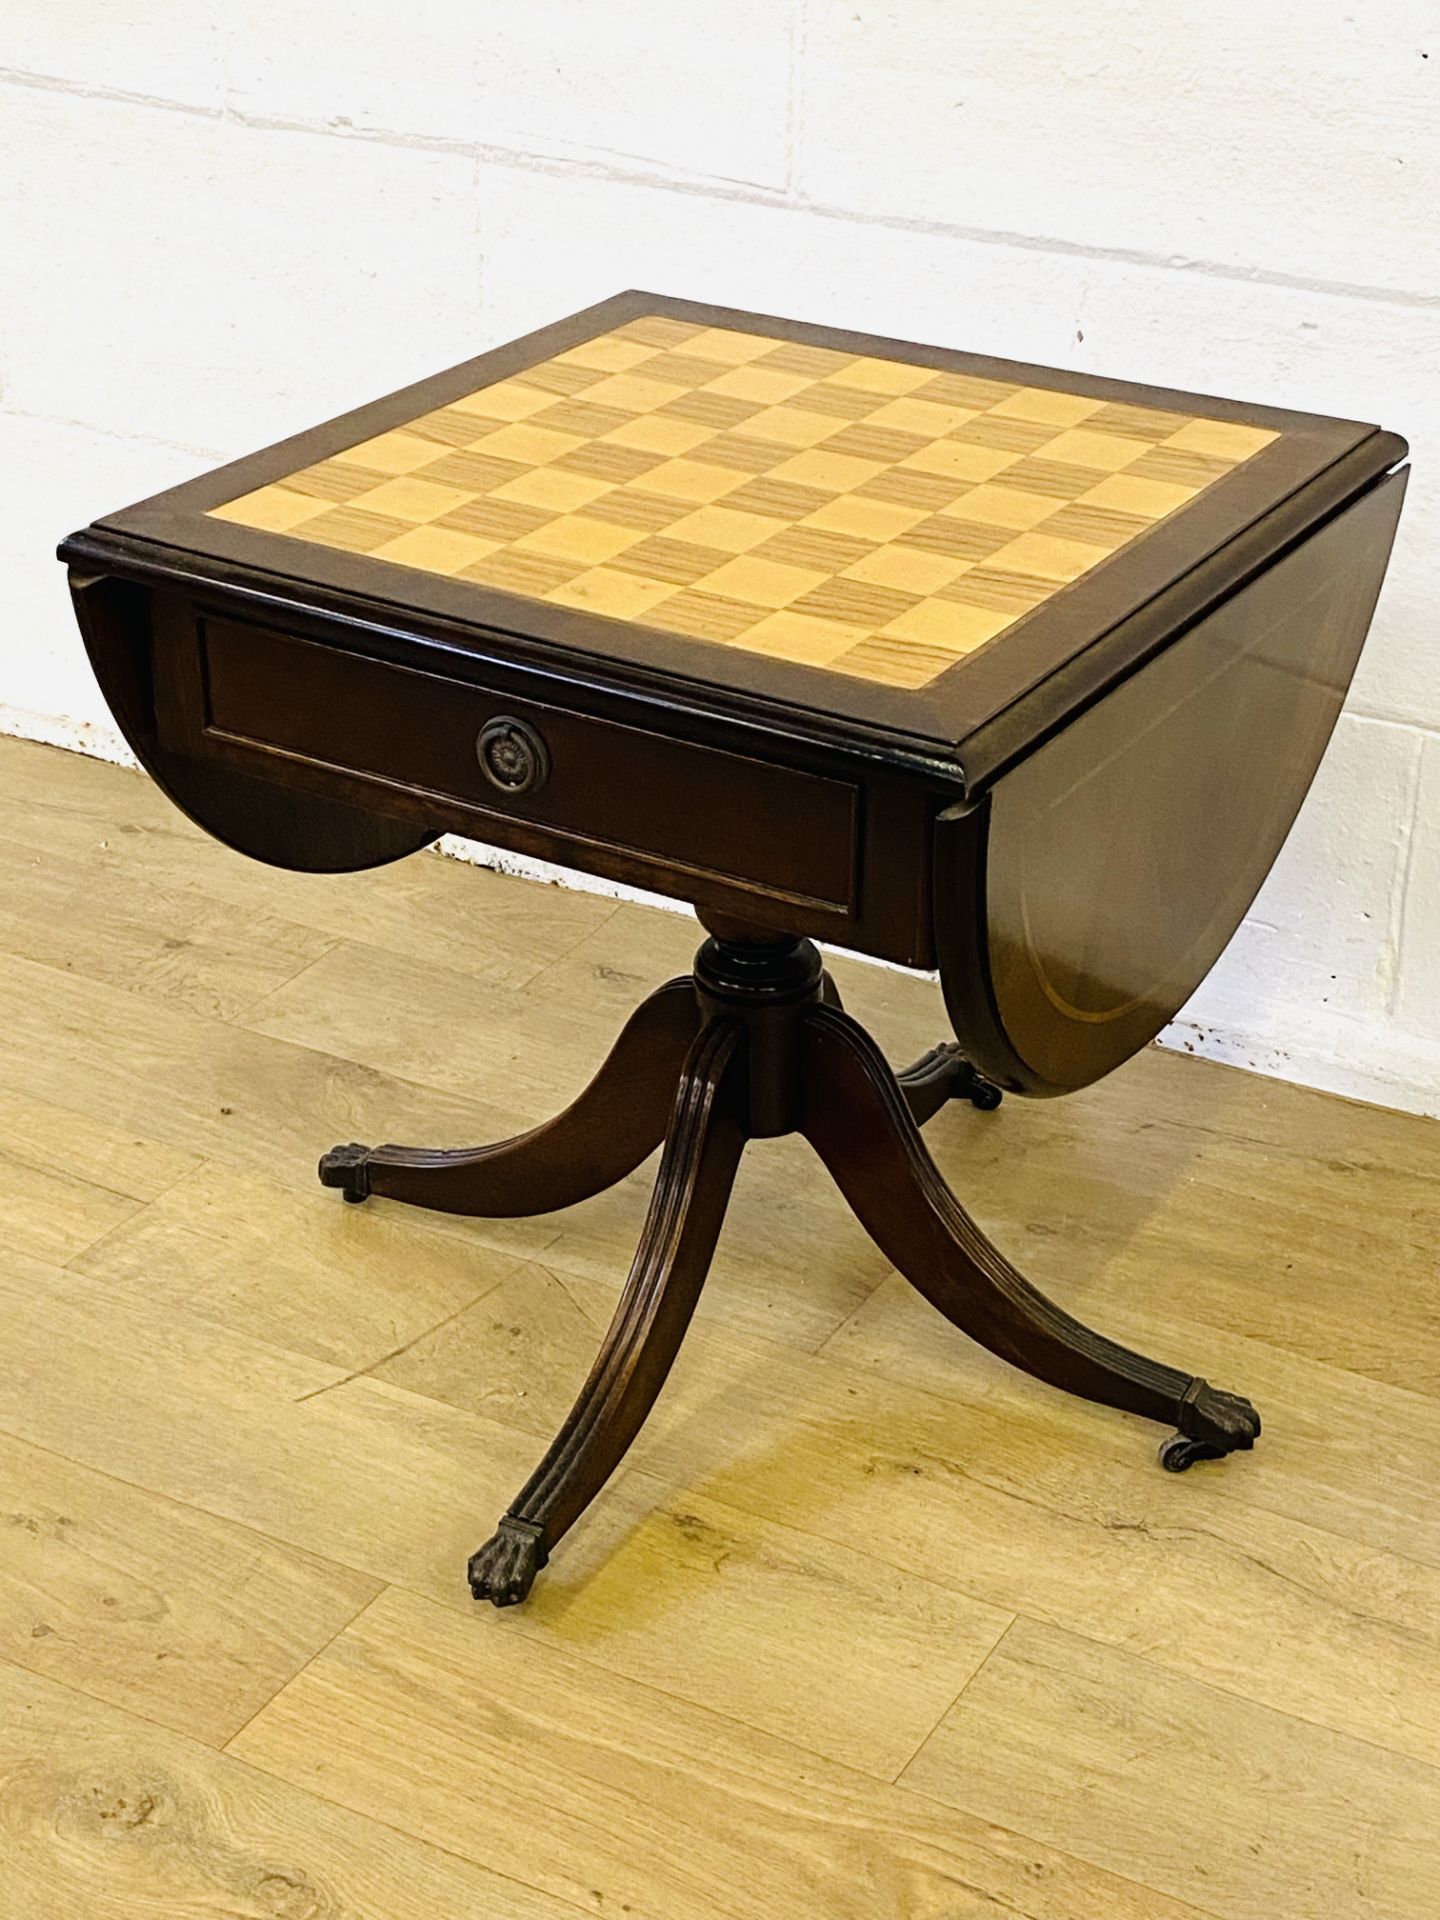 Inlaid dropside games table - Image 3 of 6